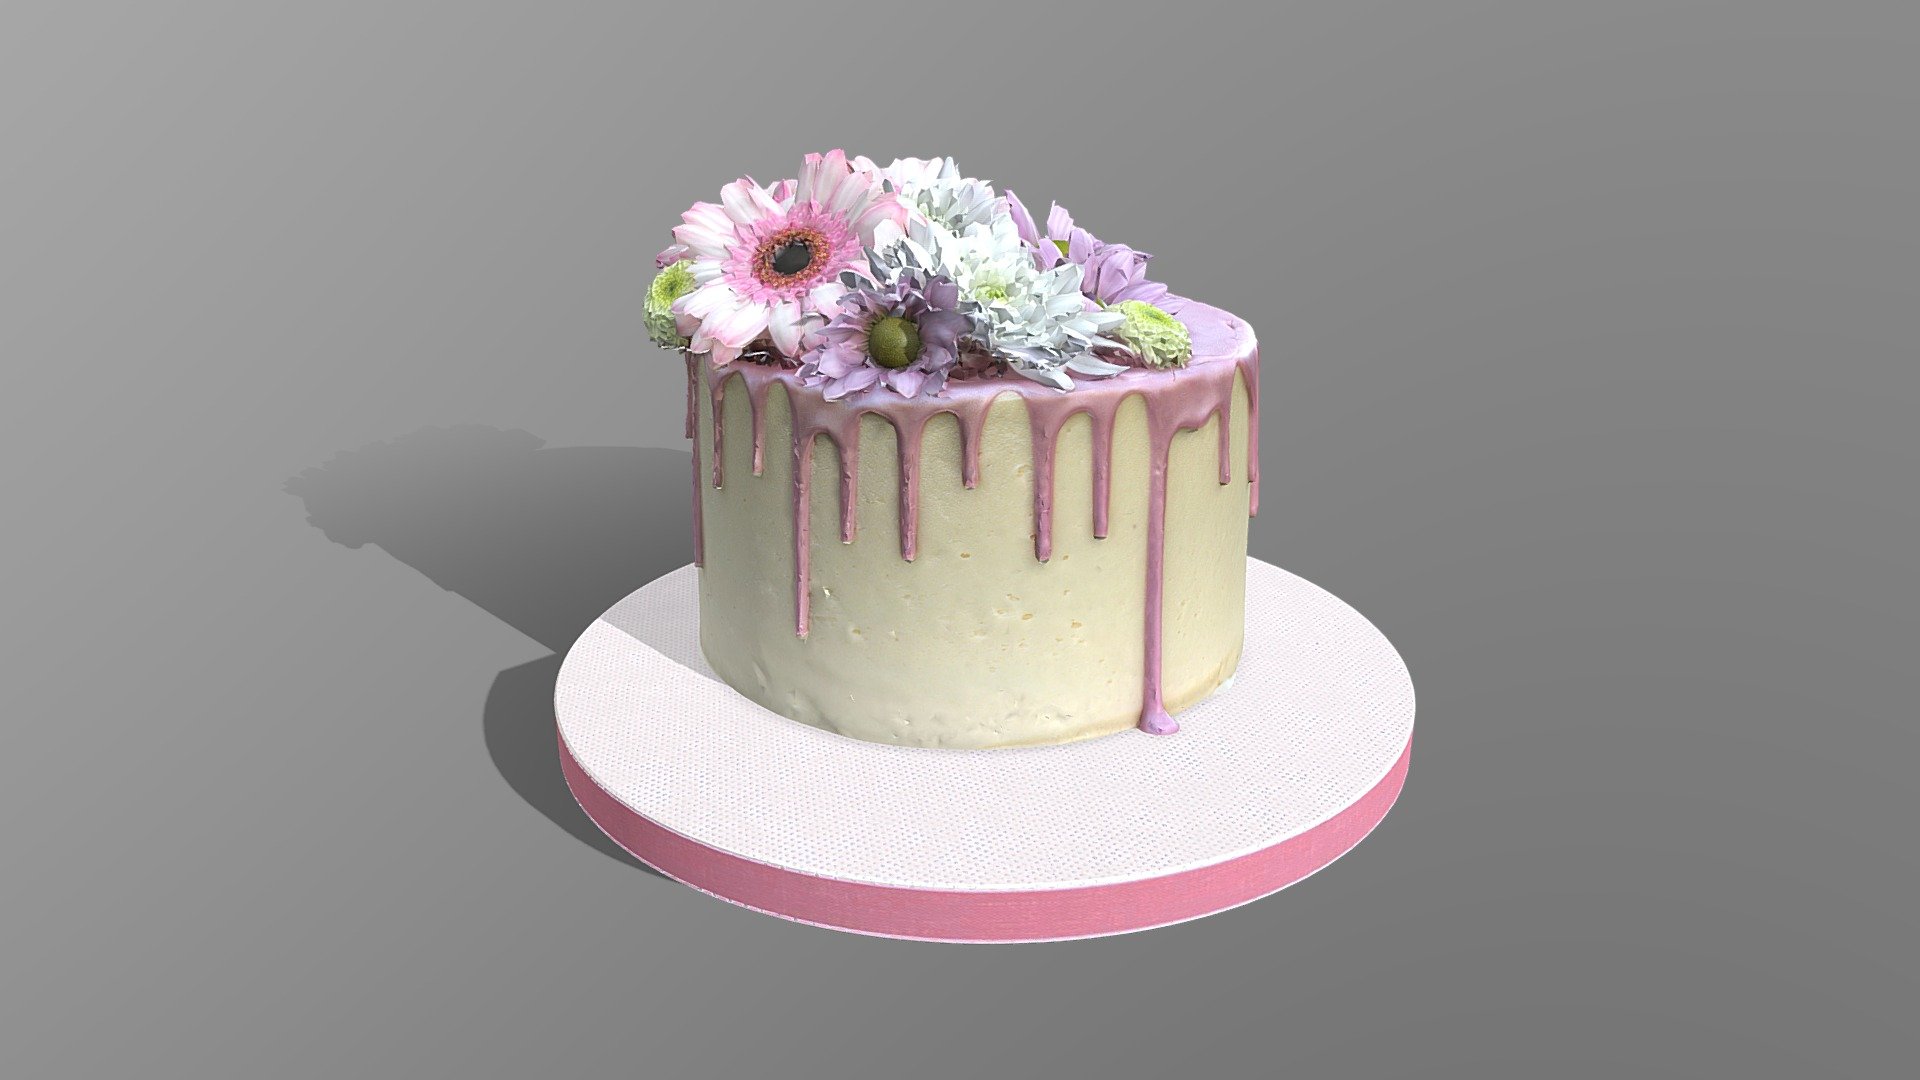 This Spring Flowers Drip Cake model was created using photogrammetry which is made by CAKESBURG Premium Cake Shop in the UK. You can purchase real cake from this link: https://cakesburg.co.uk/products/spring-flowers-naked-cake?_pos=8&amp;_sid=2903c6468&amp;_ss=r

Textures 4096*4096px PBR photoscan-based materials Base Color, Normal Map, Roughness) - Spring Flowers Drip Cake - Buy Royalty Free 3D model by Cakesburg Premium 3D Cake Shop (@Viscom_Cakesburg) 3d model